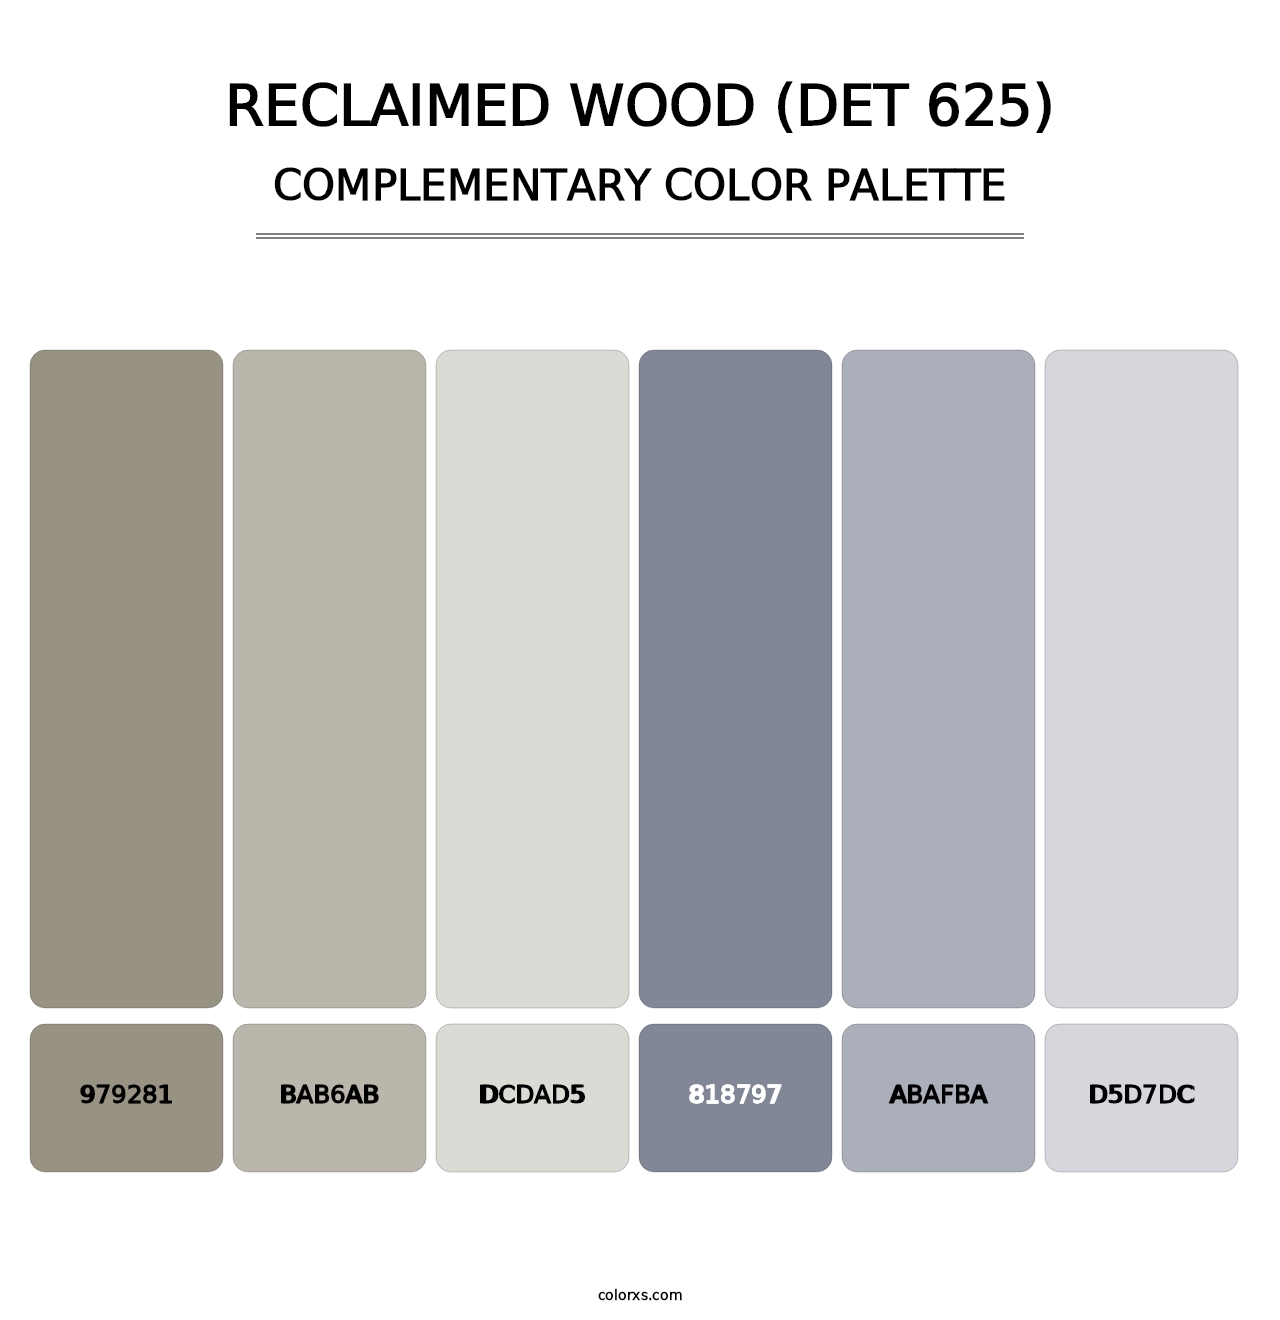 Reclaimed Wood (DET 625) - Complementary Color Palette